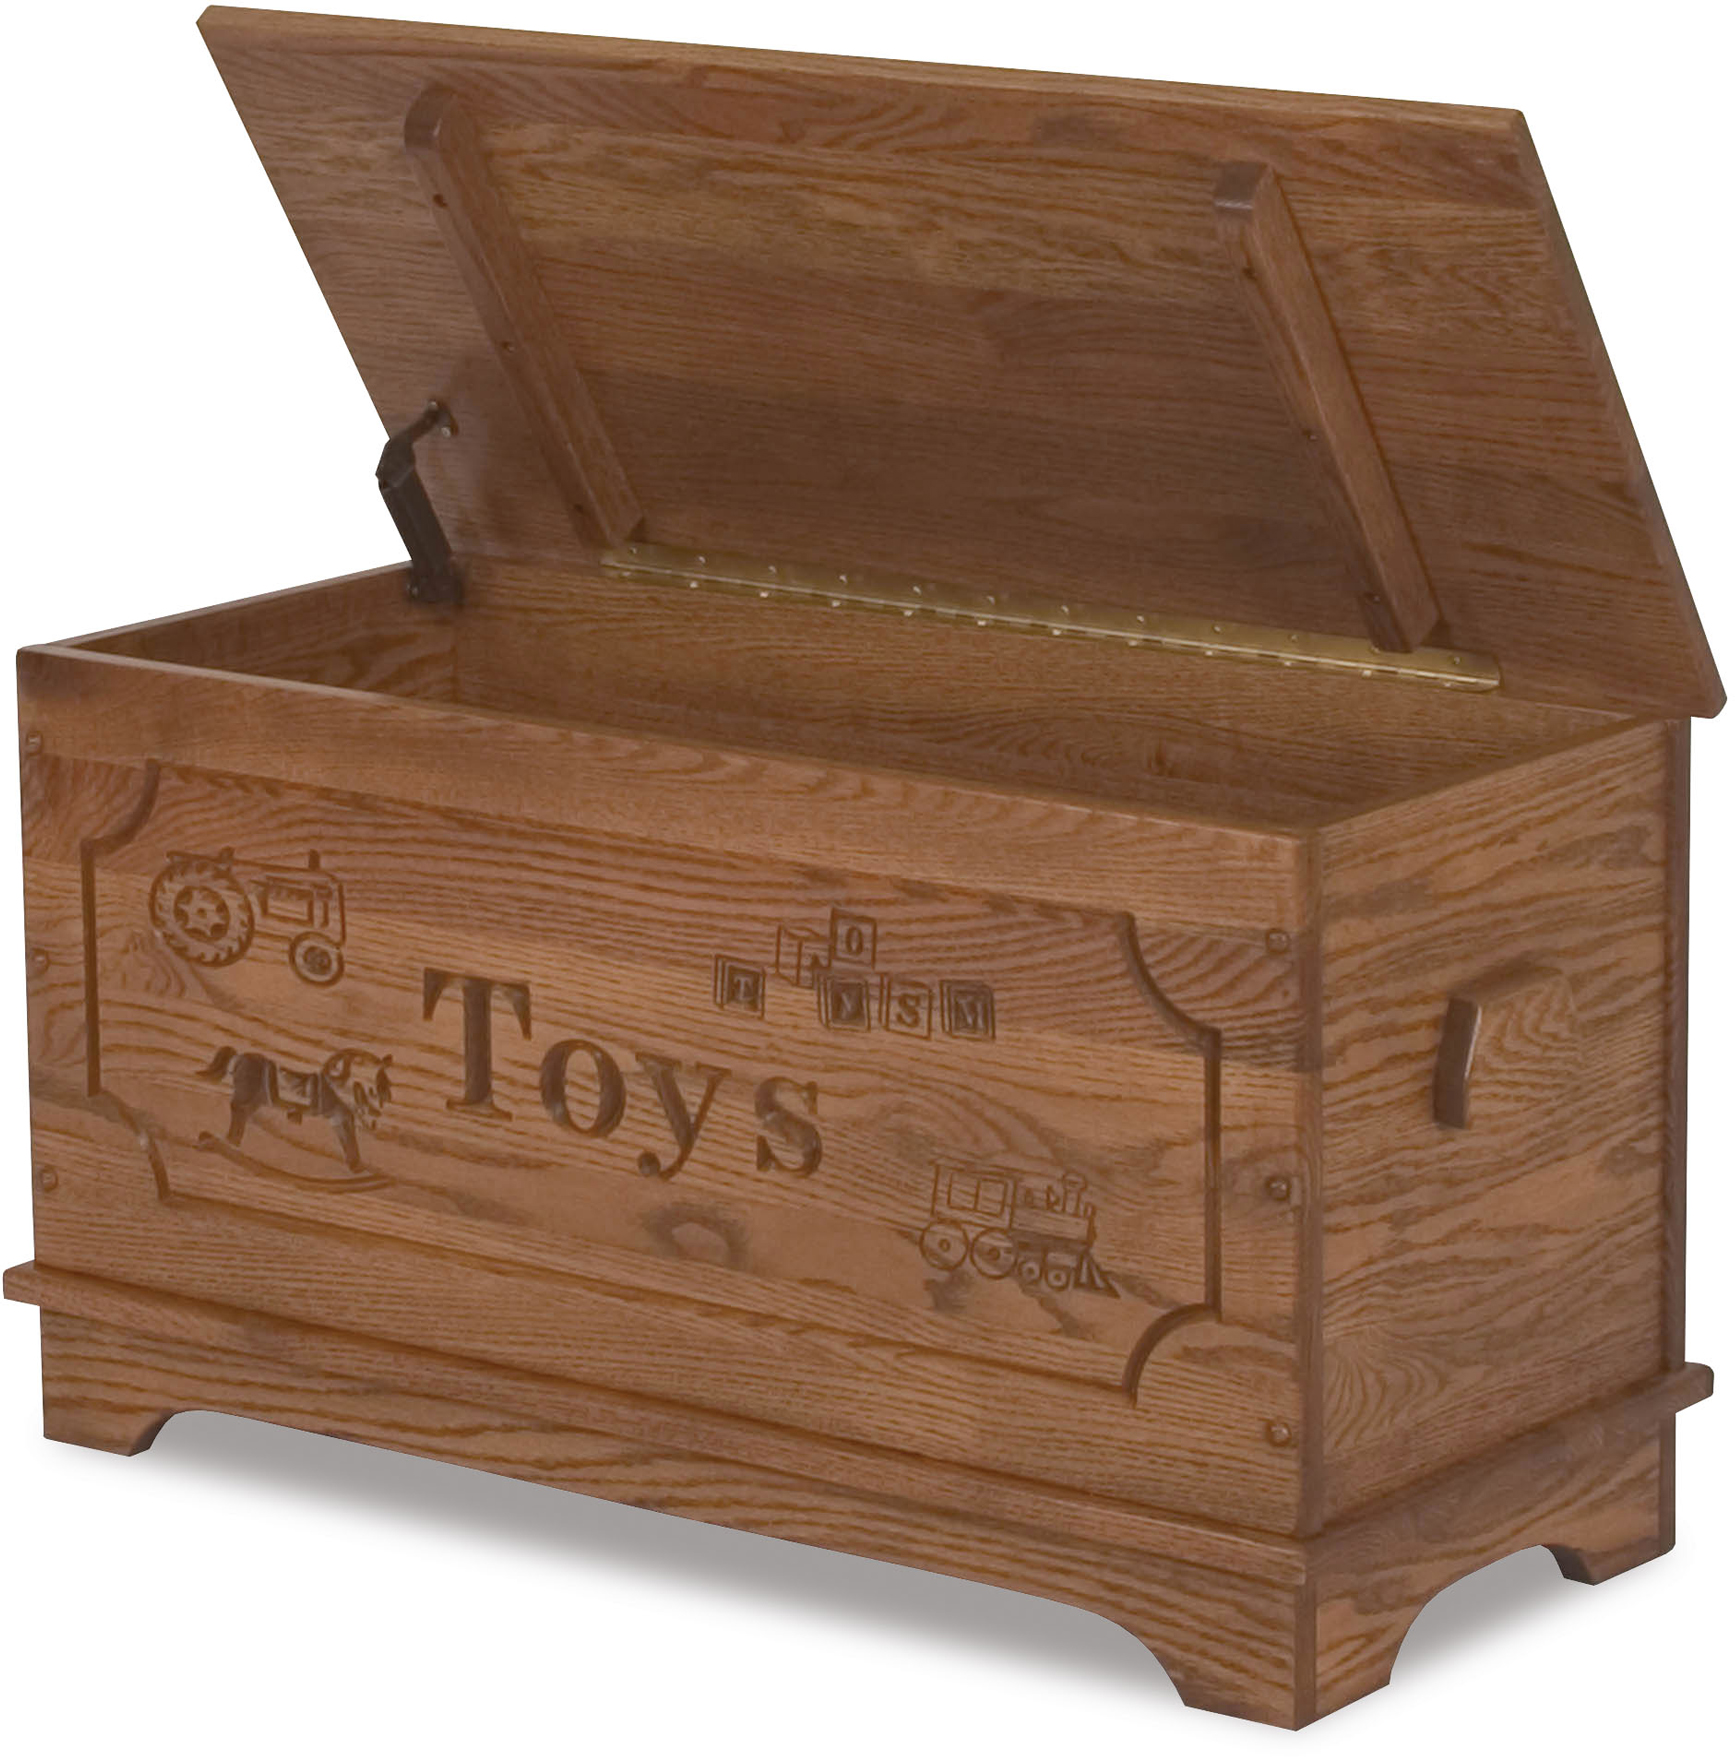 Wood Toy Boxes